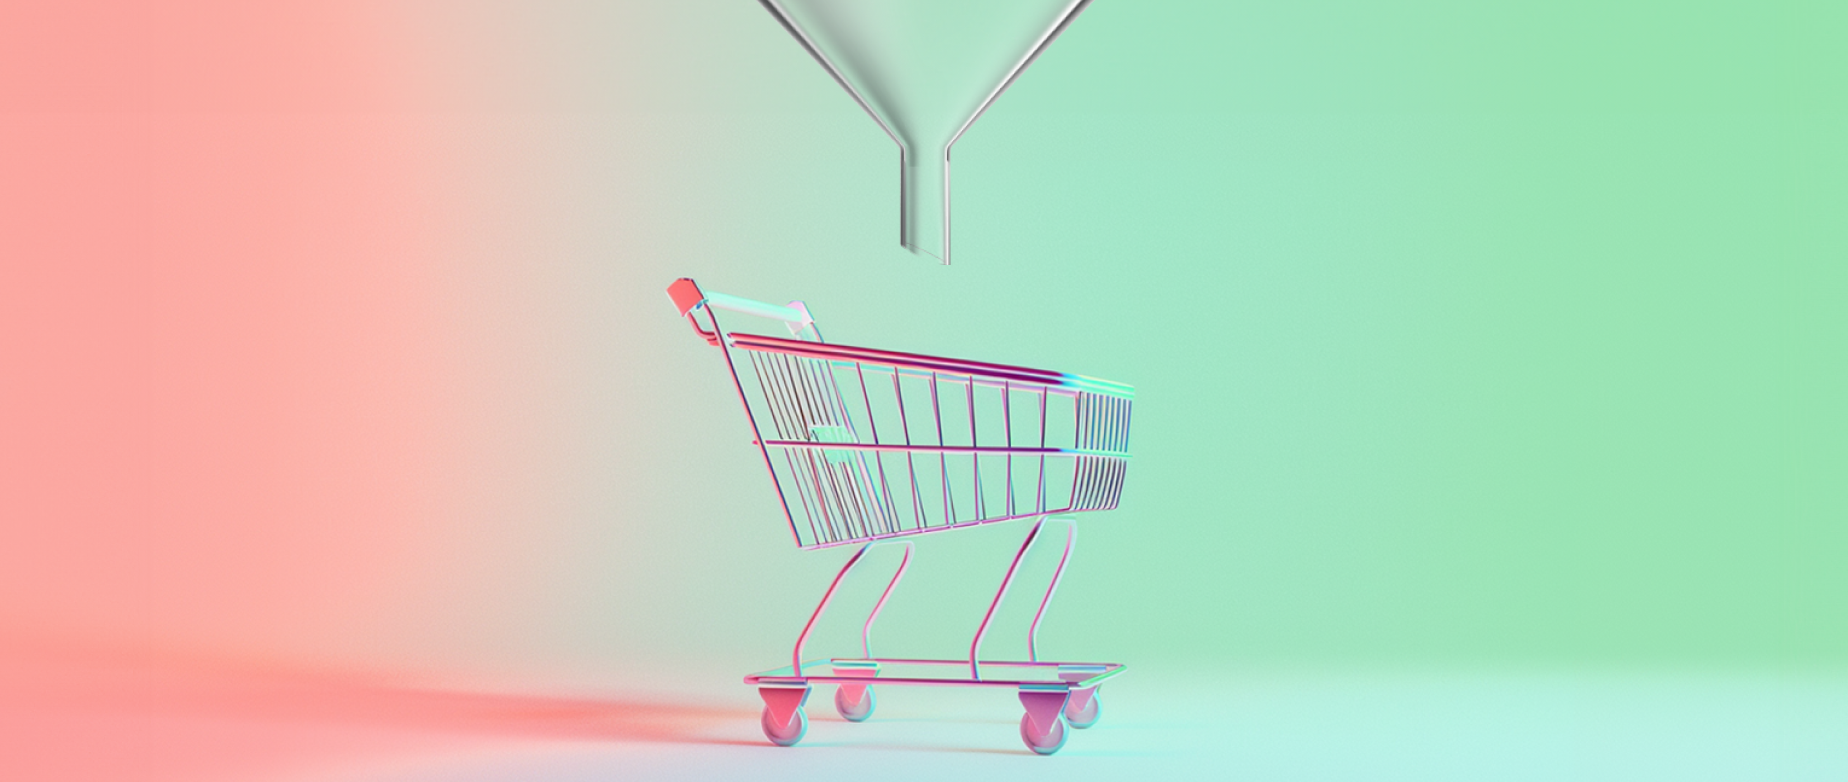 A shopping cart on a half red half green background.